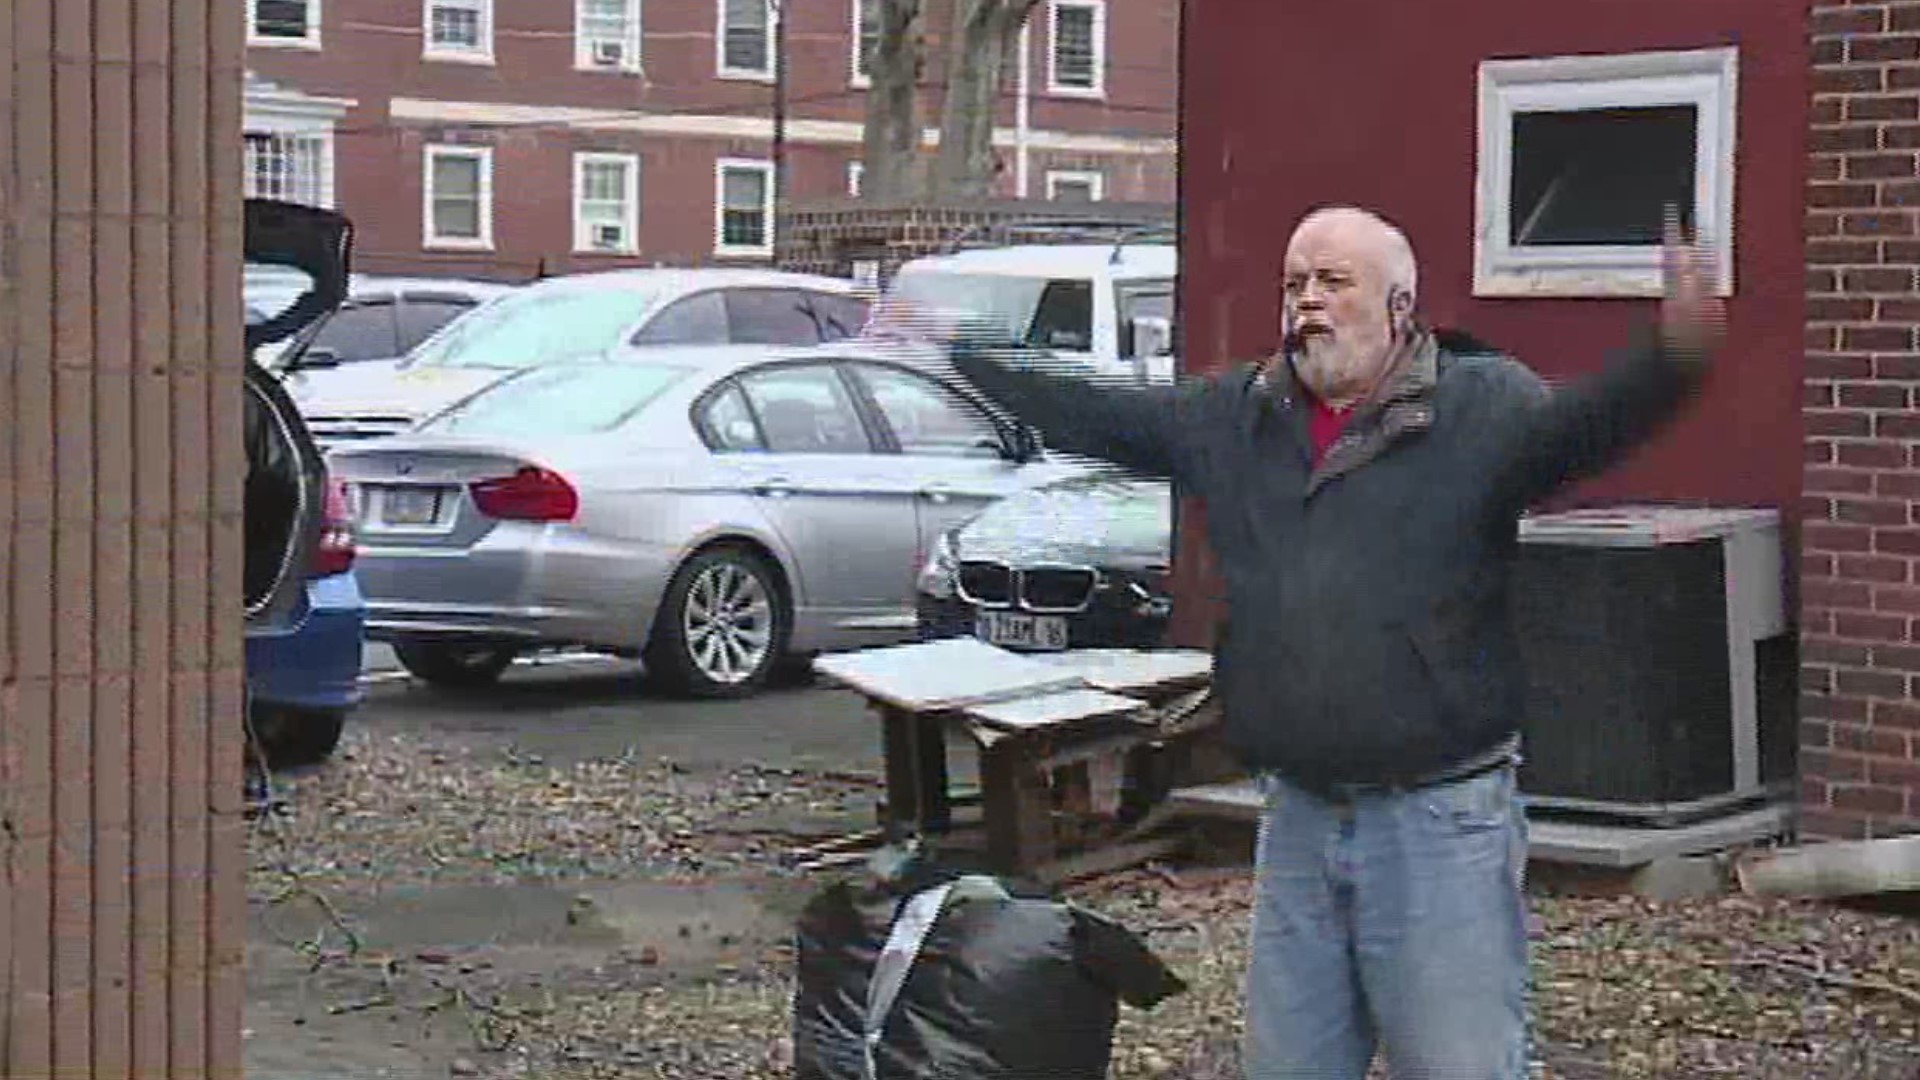 A retired DJ played music to an apartment complex.